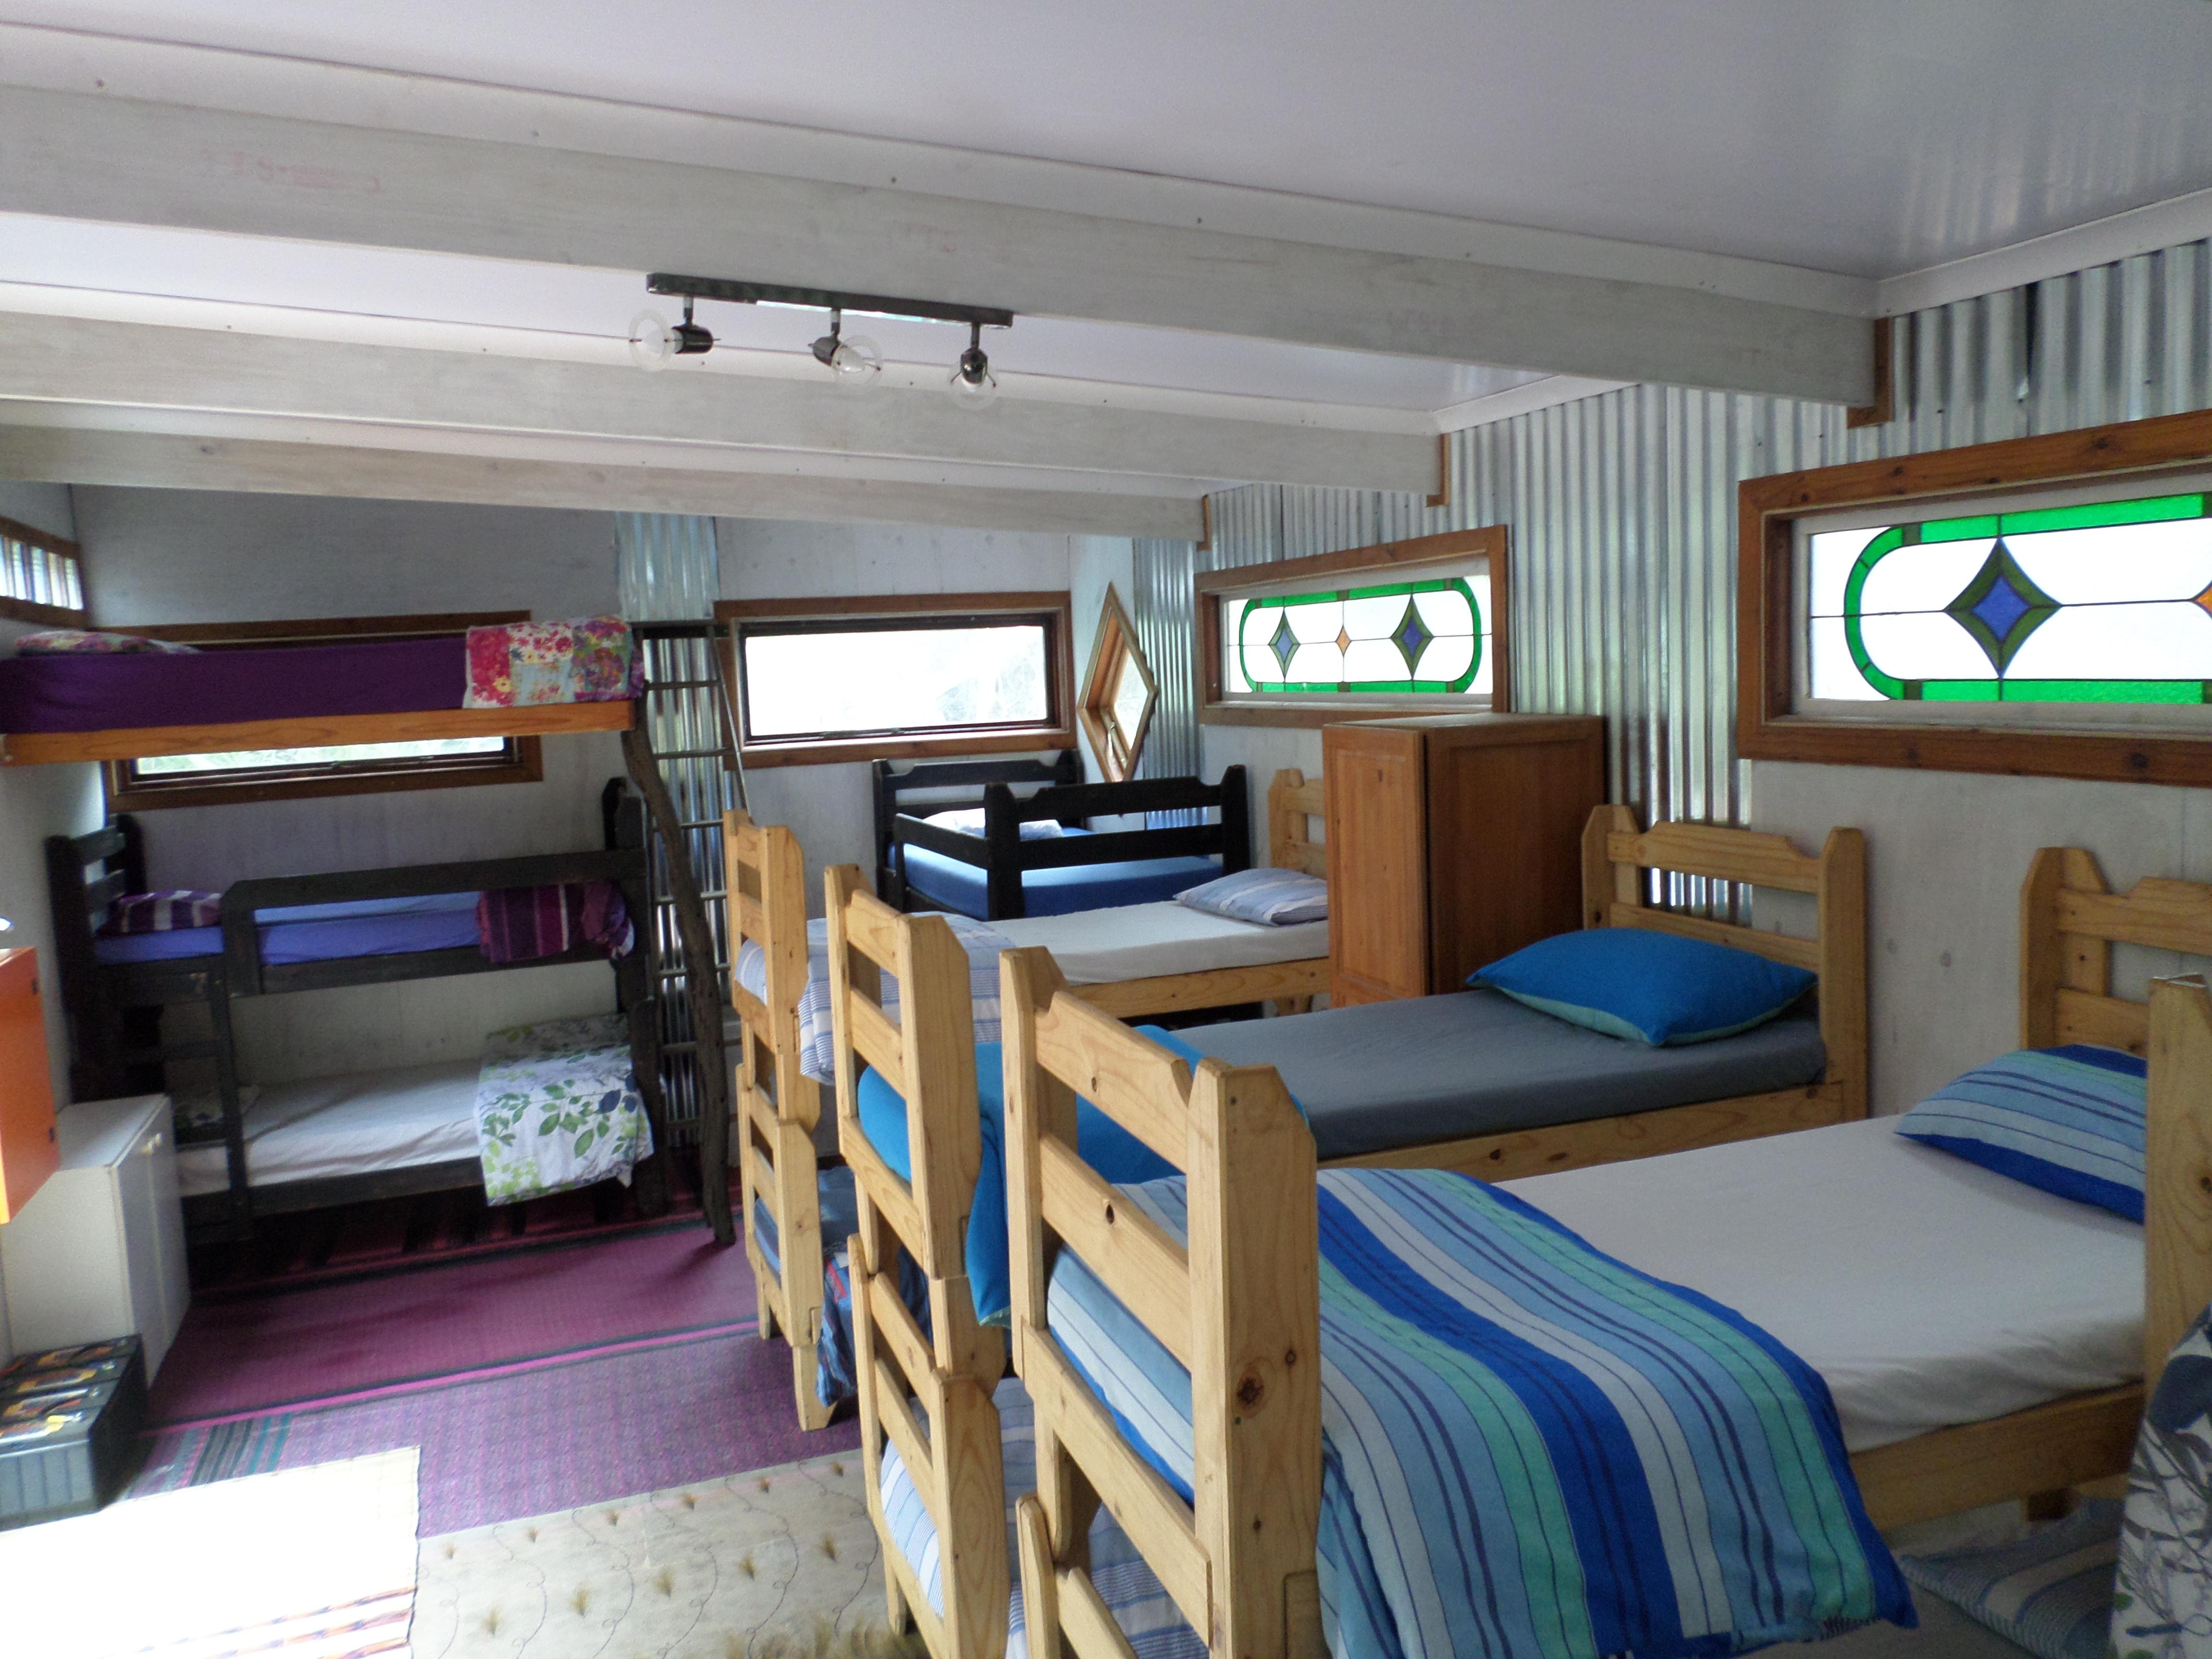 Dorm view of 10 of the 12 single bunks and 1 double 